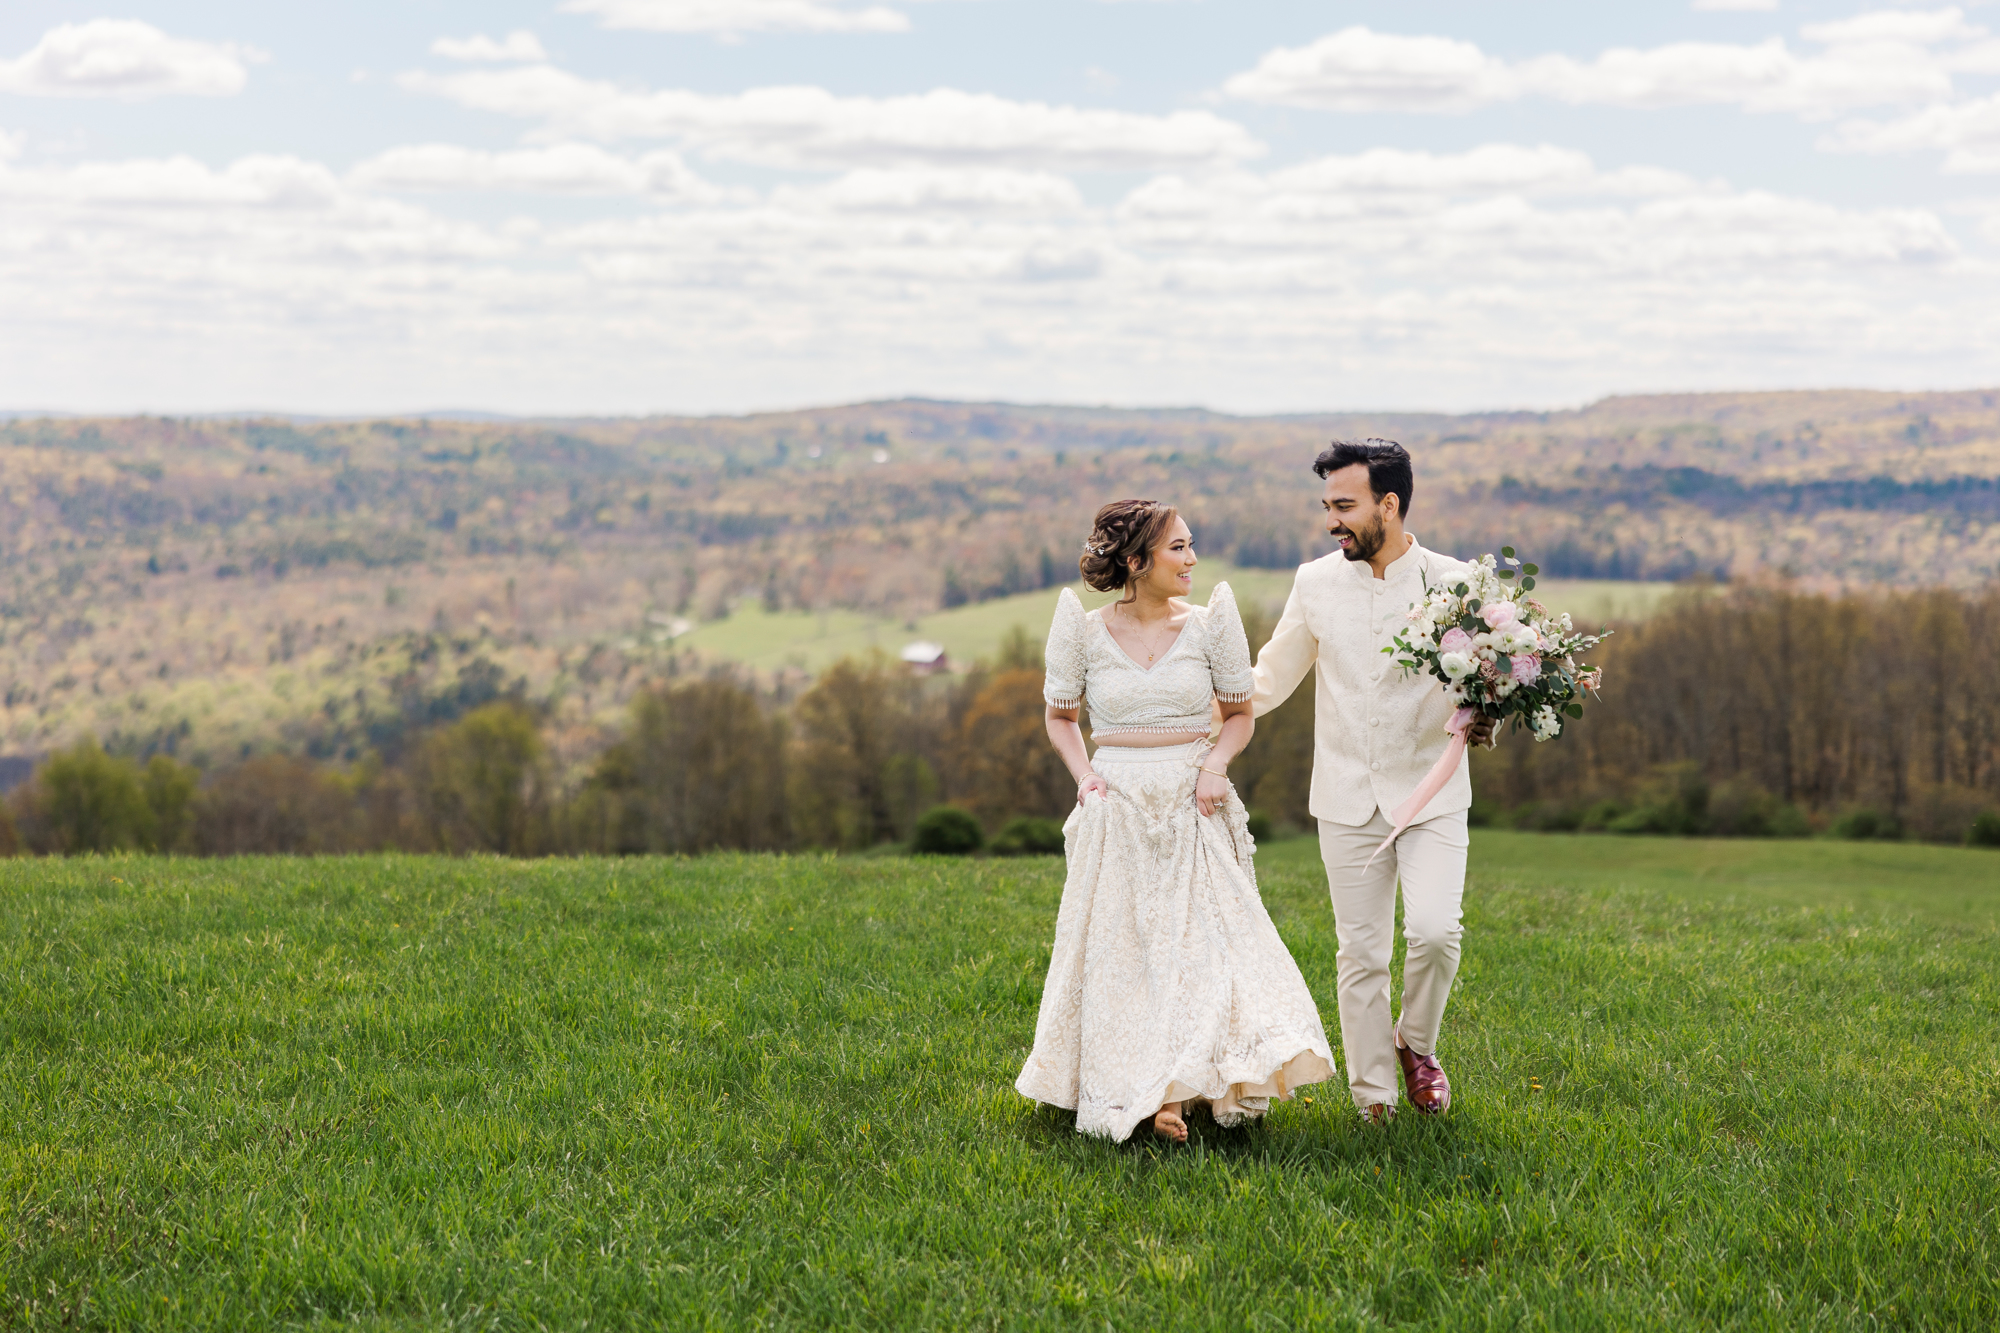 Iconic Summertime Seminary Hill Wedding in NY